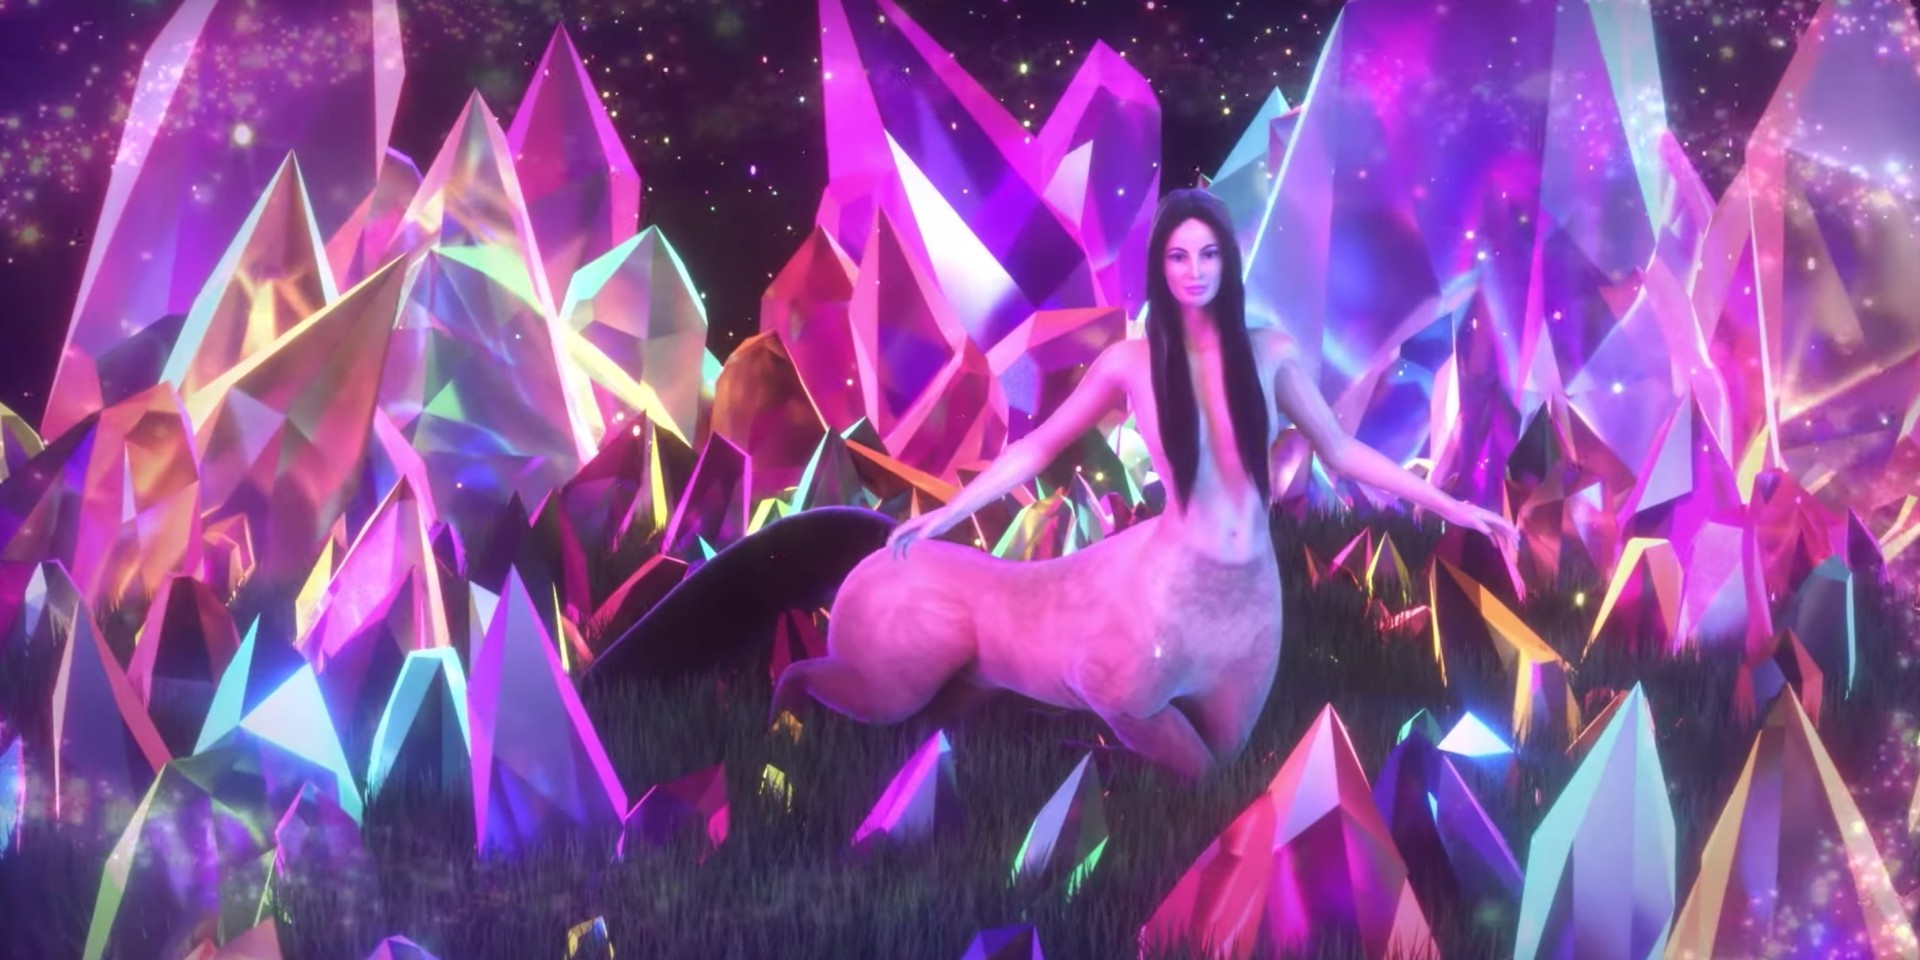 Kacey Musgraves is a beautiful centaur in trippy new music video for 'Oh, What A World' – watch